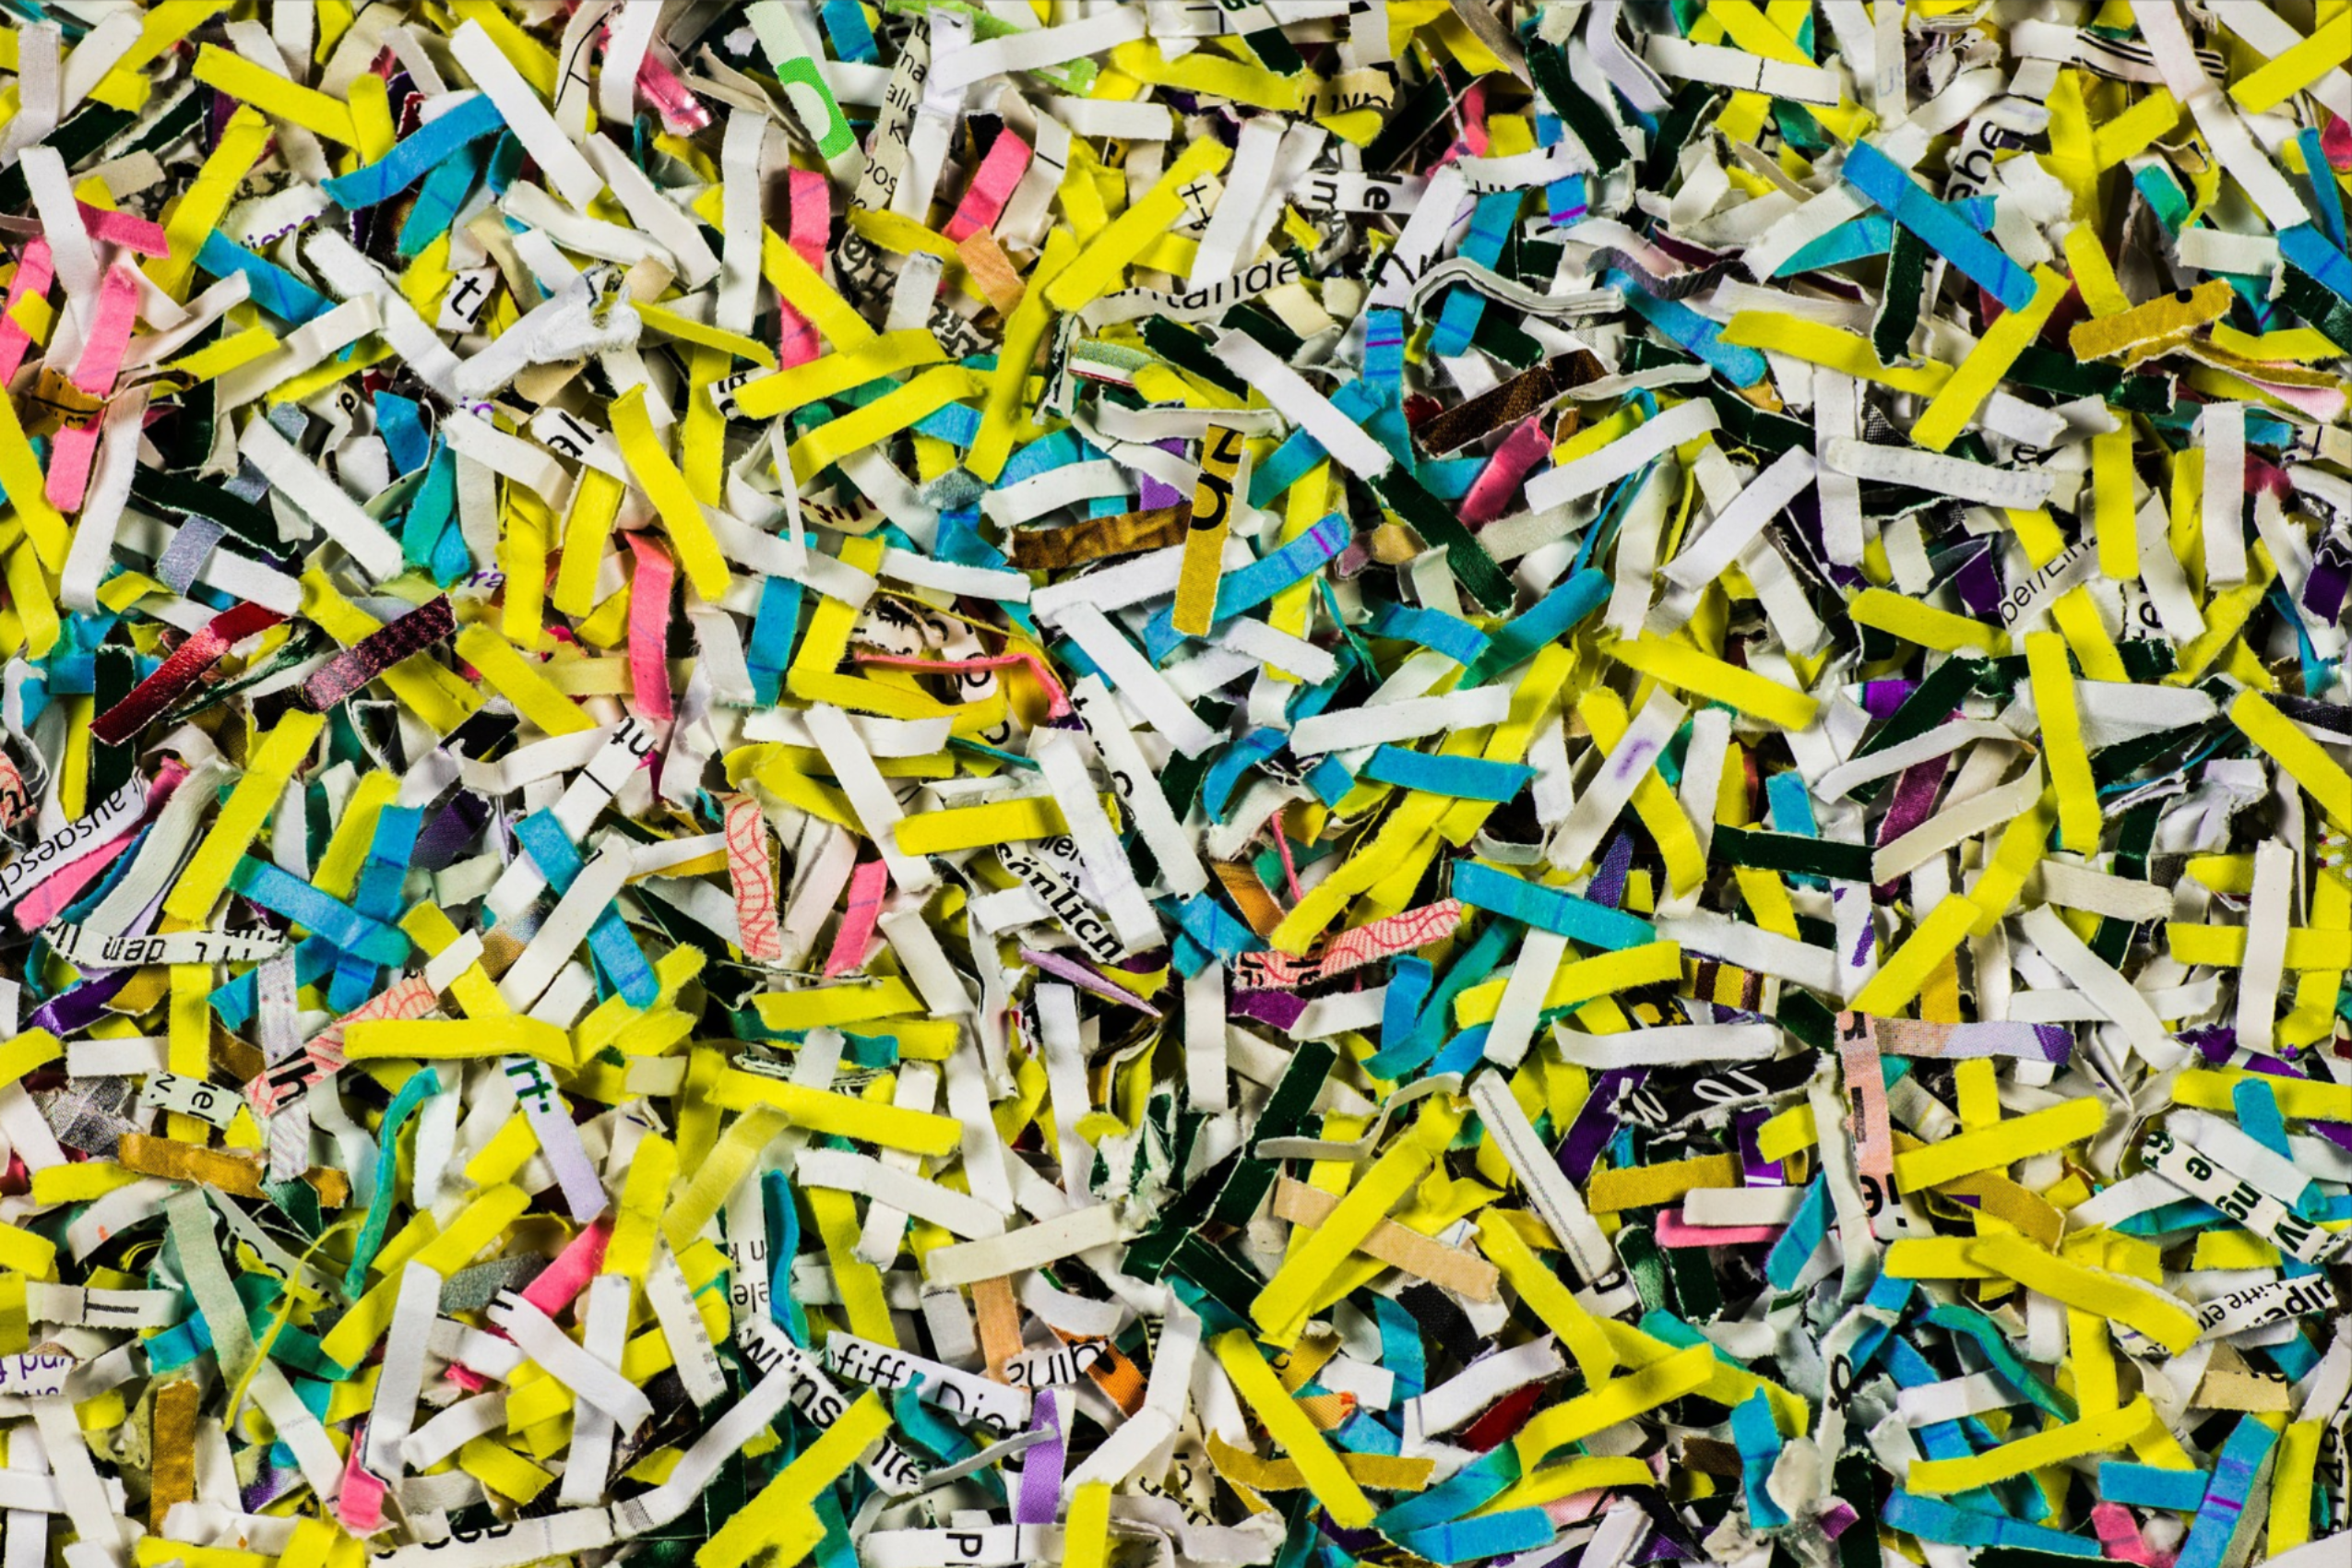 Beaufort County Offers Free Secure  Shredding Event in Bluffton June 8